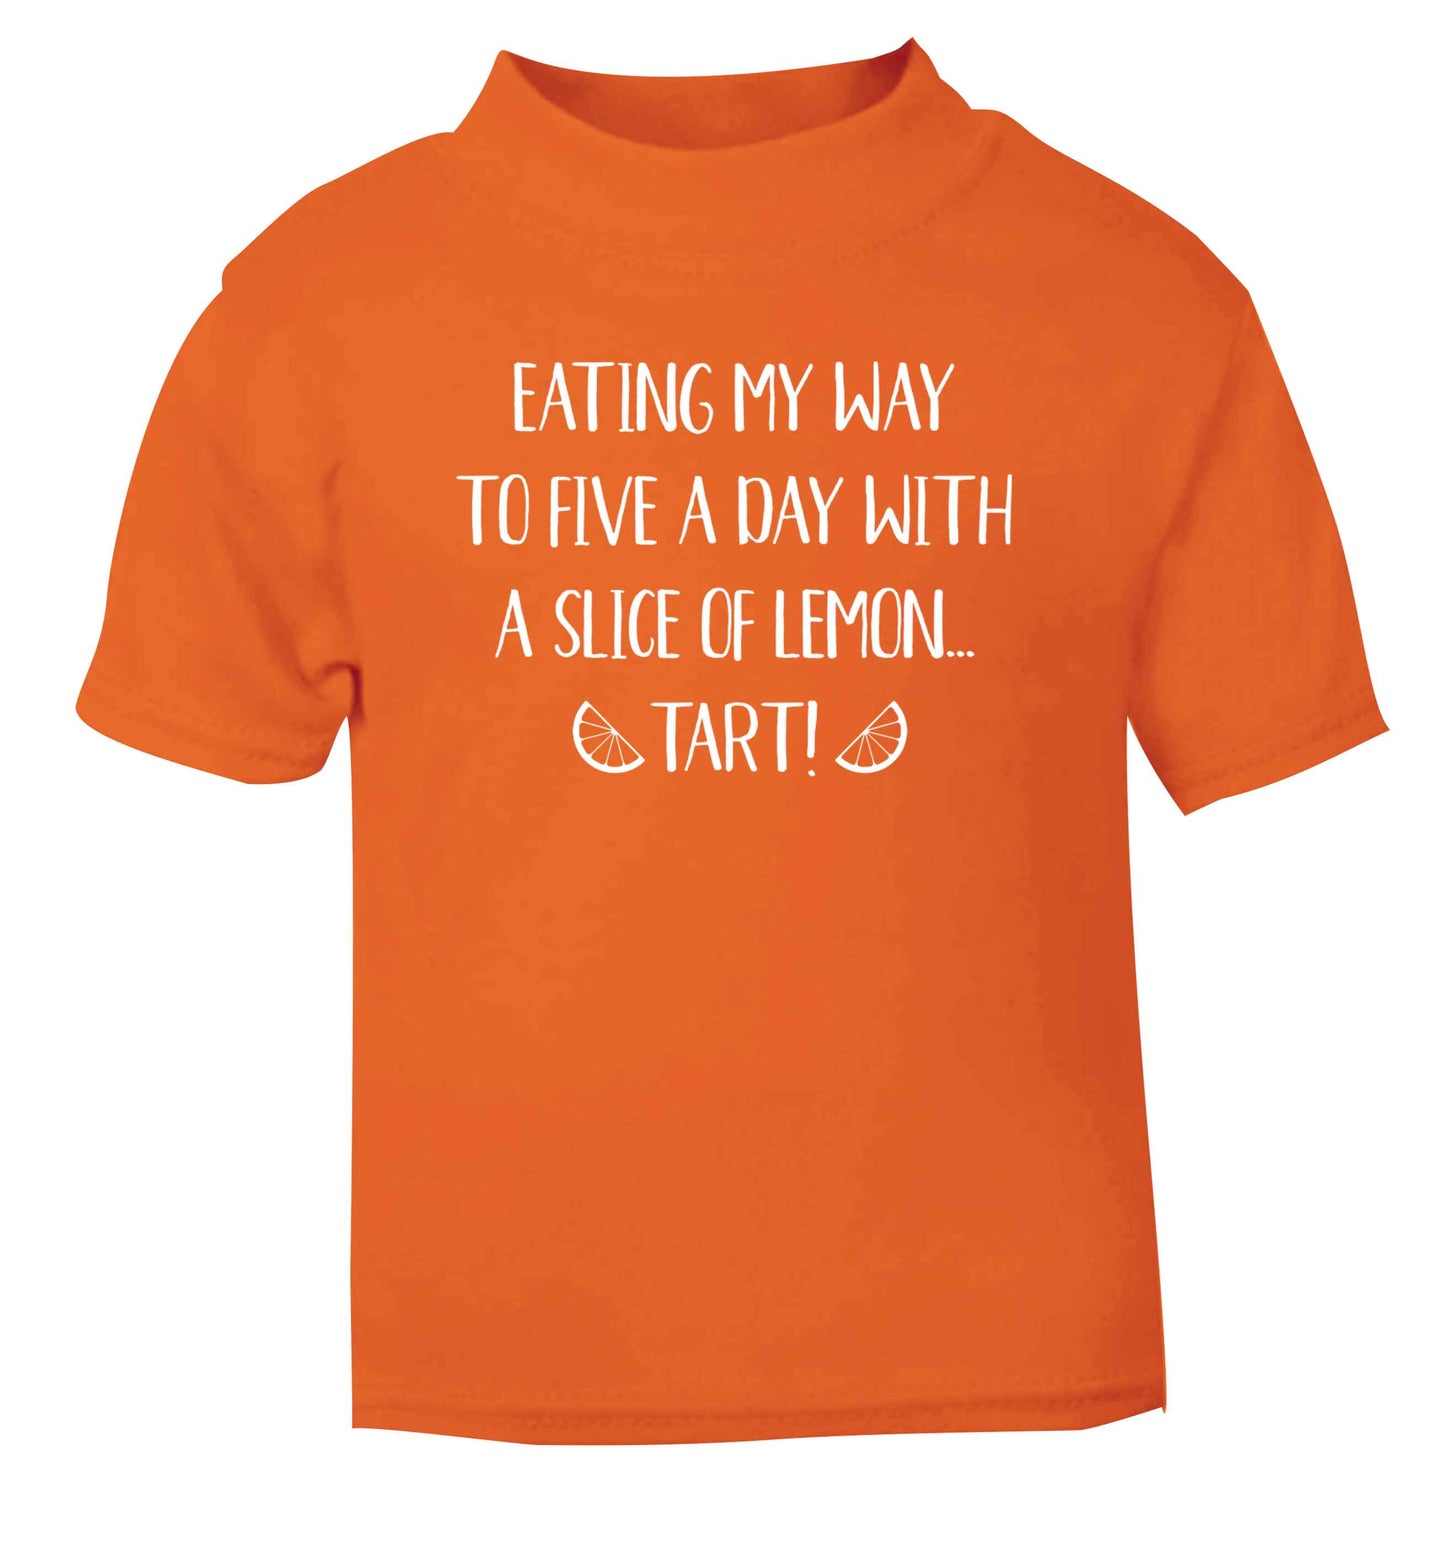 Eating my way to five a day with a slice of lemon tart orange Baby Toddler Tshirt 2 Years